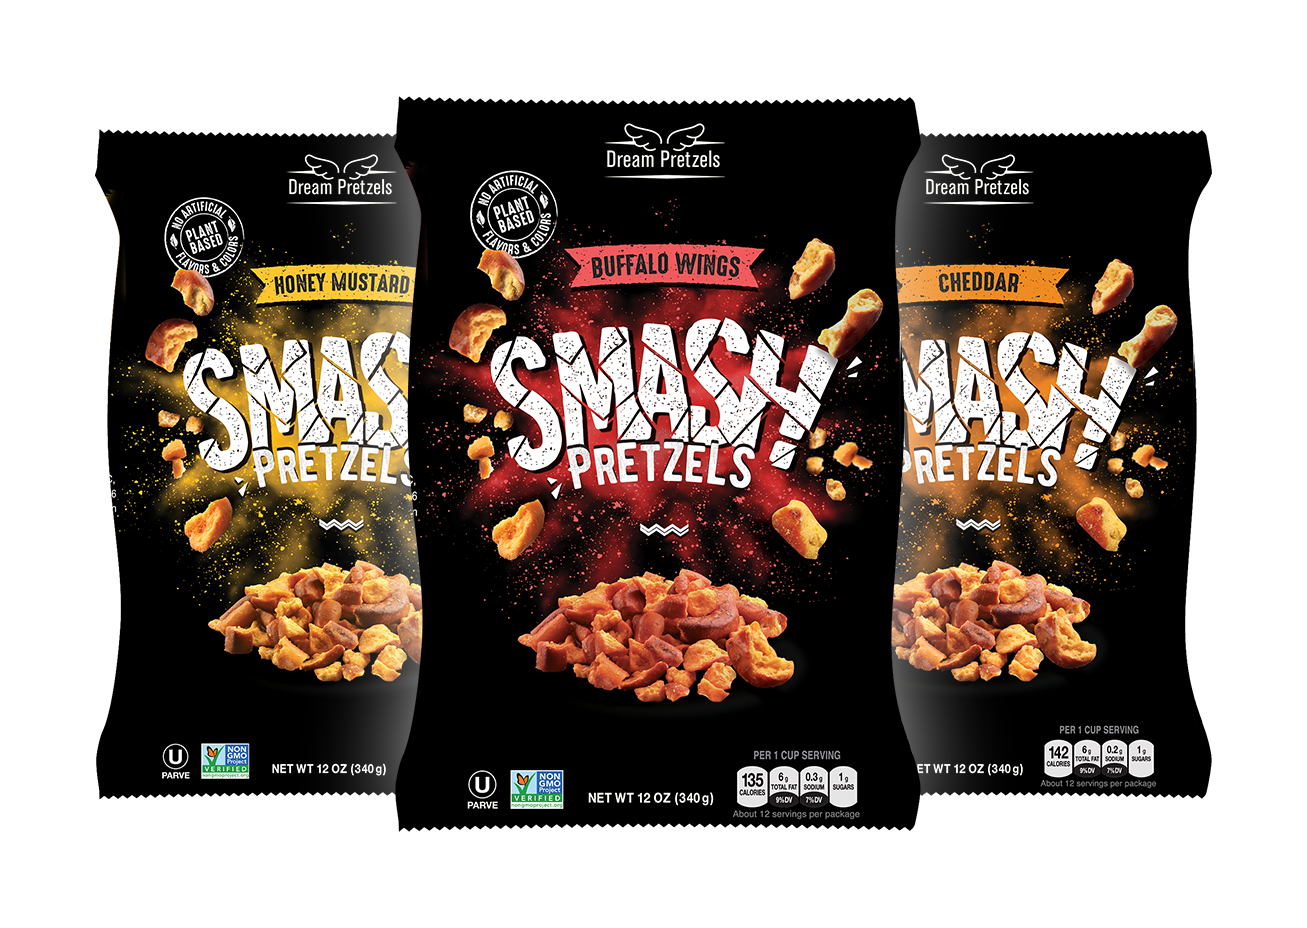 3 packs of smash pretzels in different flavours: honey mustard, buffalo wings, cheddar